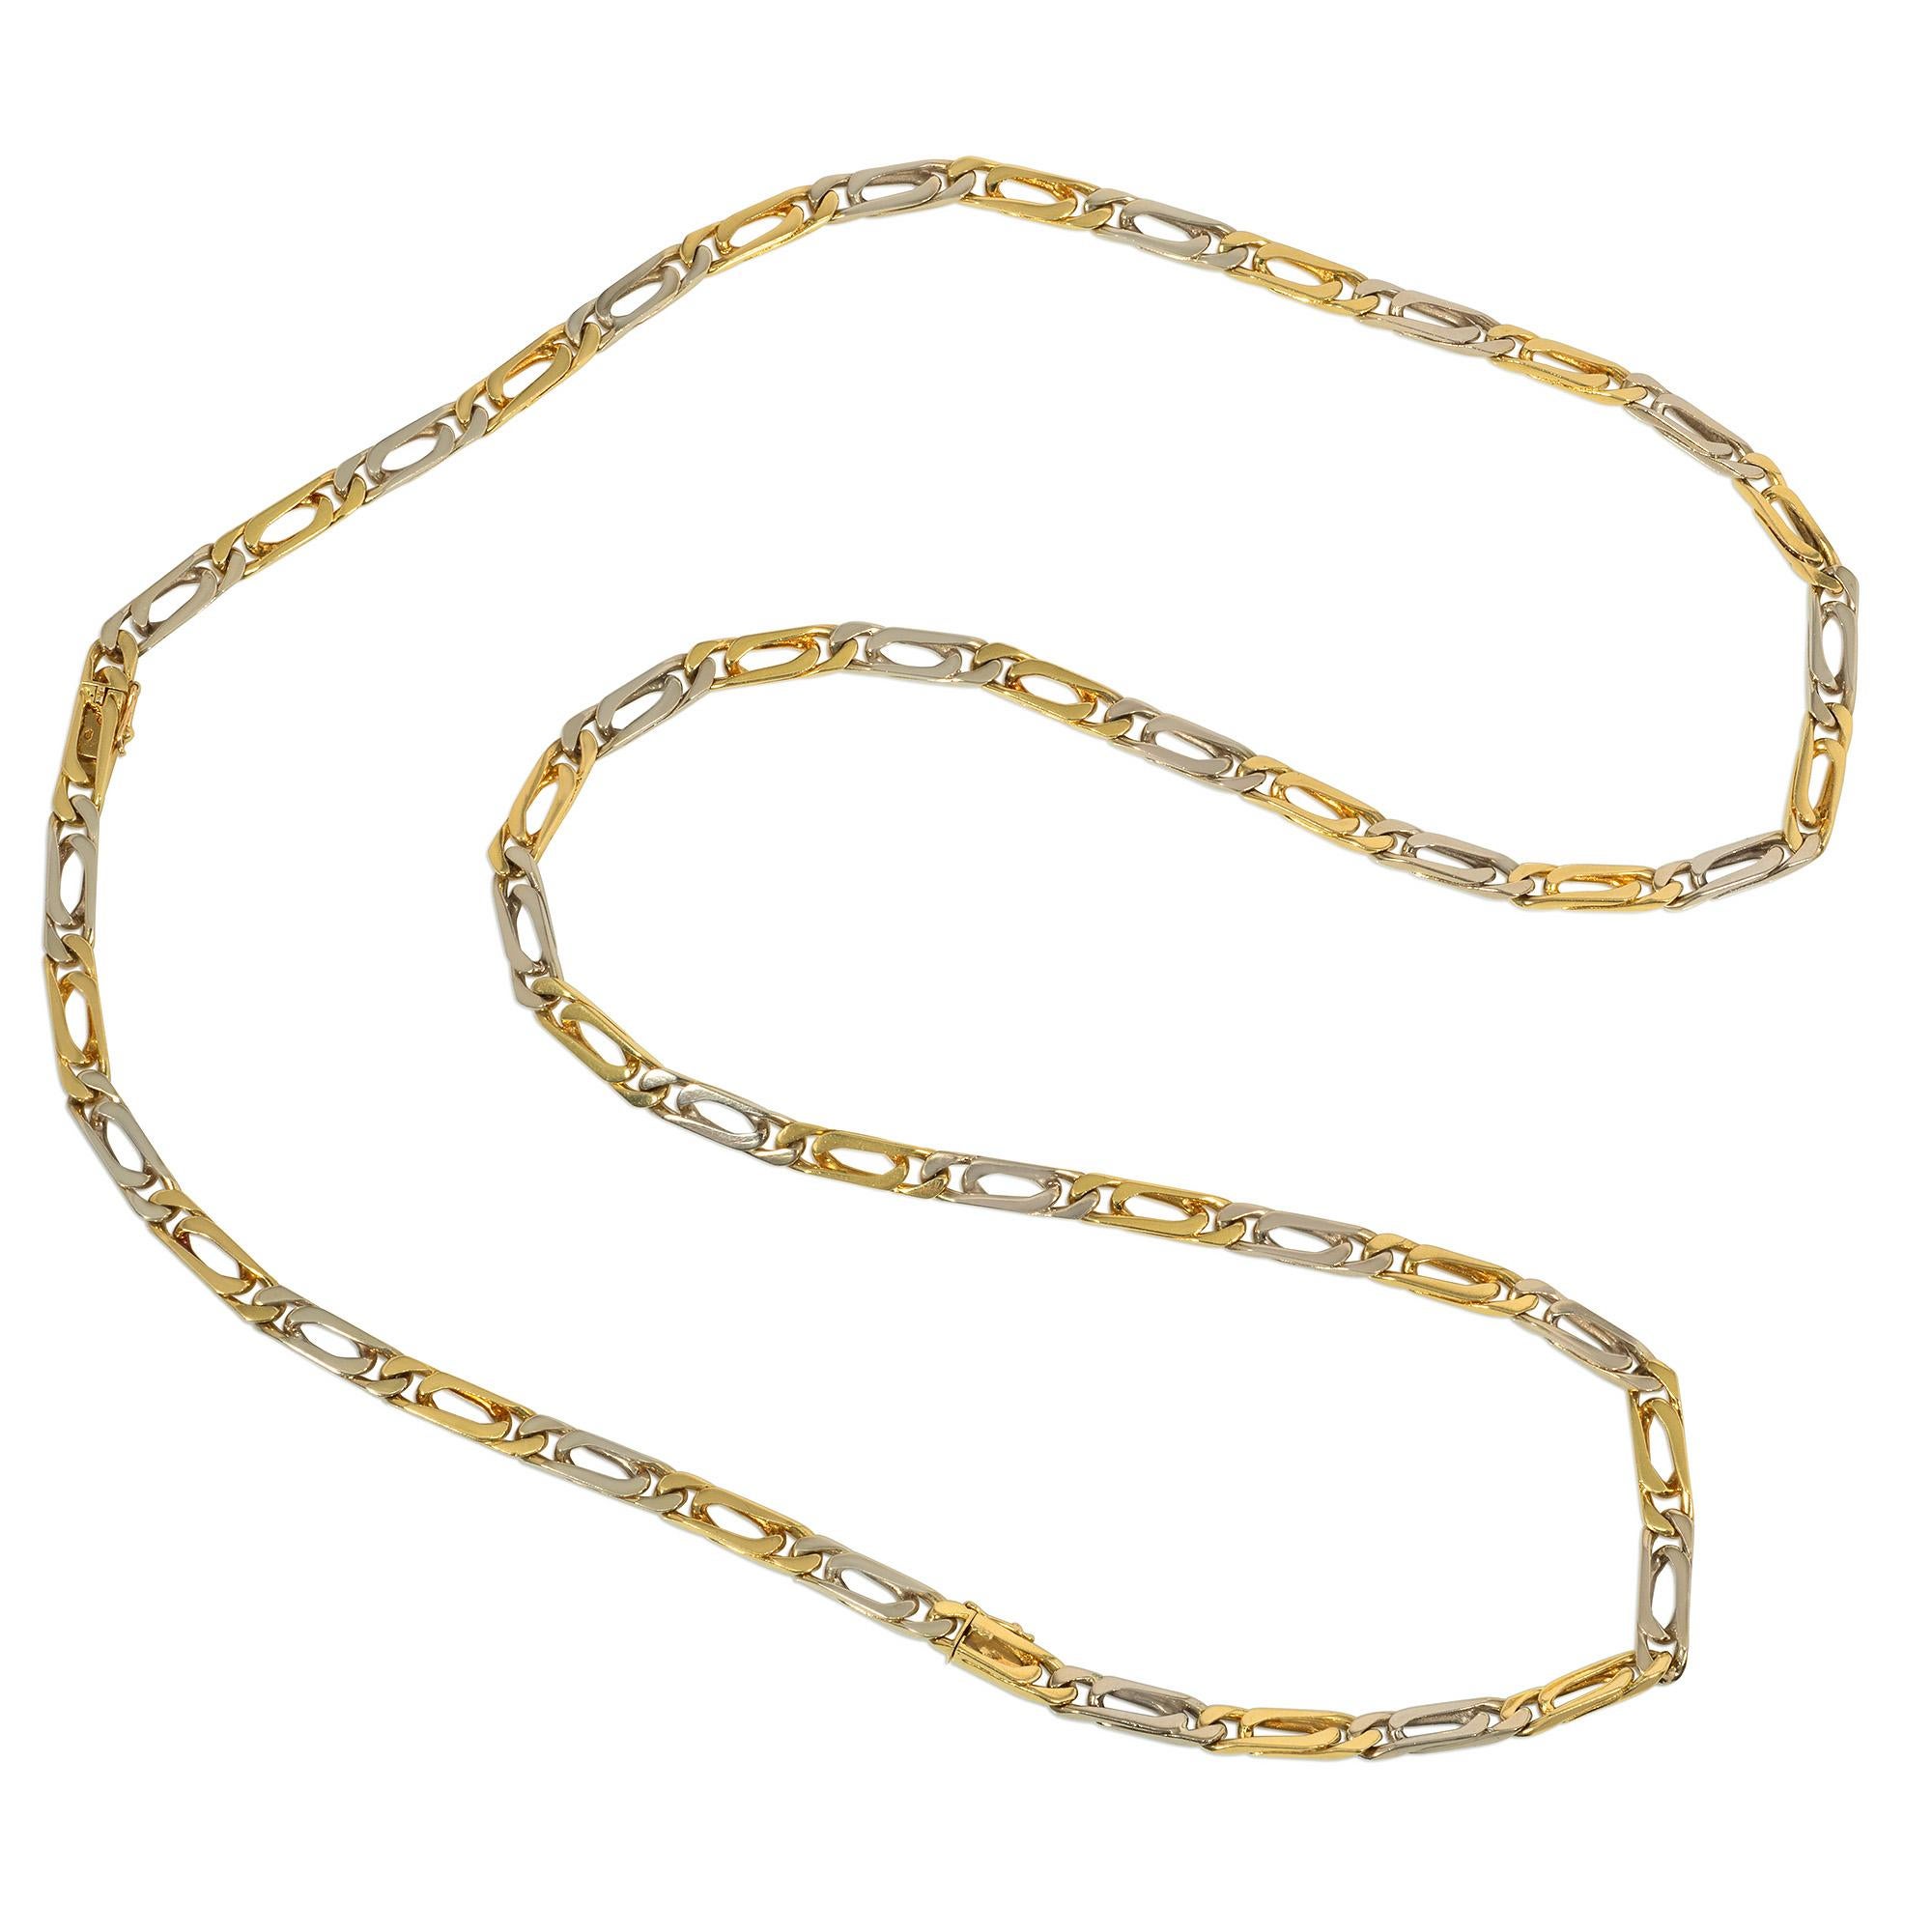 A 1970s two-color gold figaro link chain, convertible to a shorter necklace and a bracelet, in 18k white and yellow gold. Van Cleef & Arpels, France. #B4313R2.  
Total length: 35